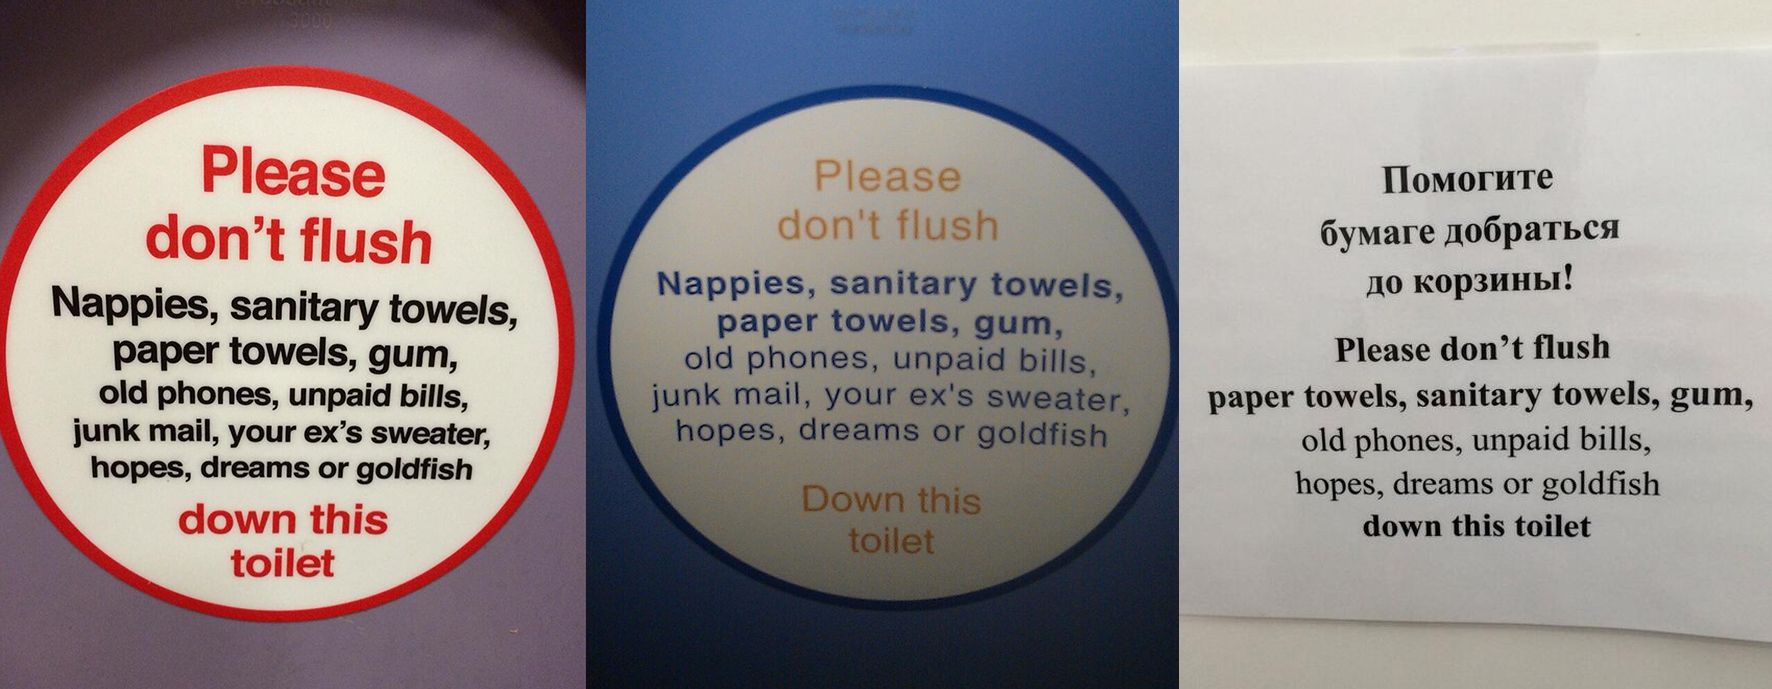 Some toilet humour in the bathrooms in Sochi ©Twitter